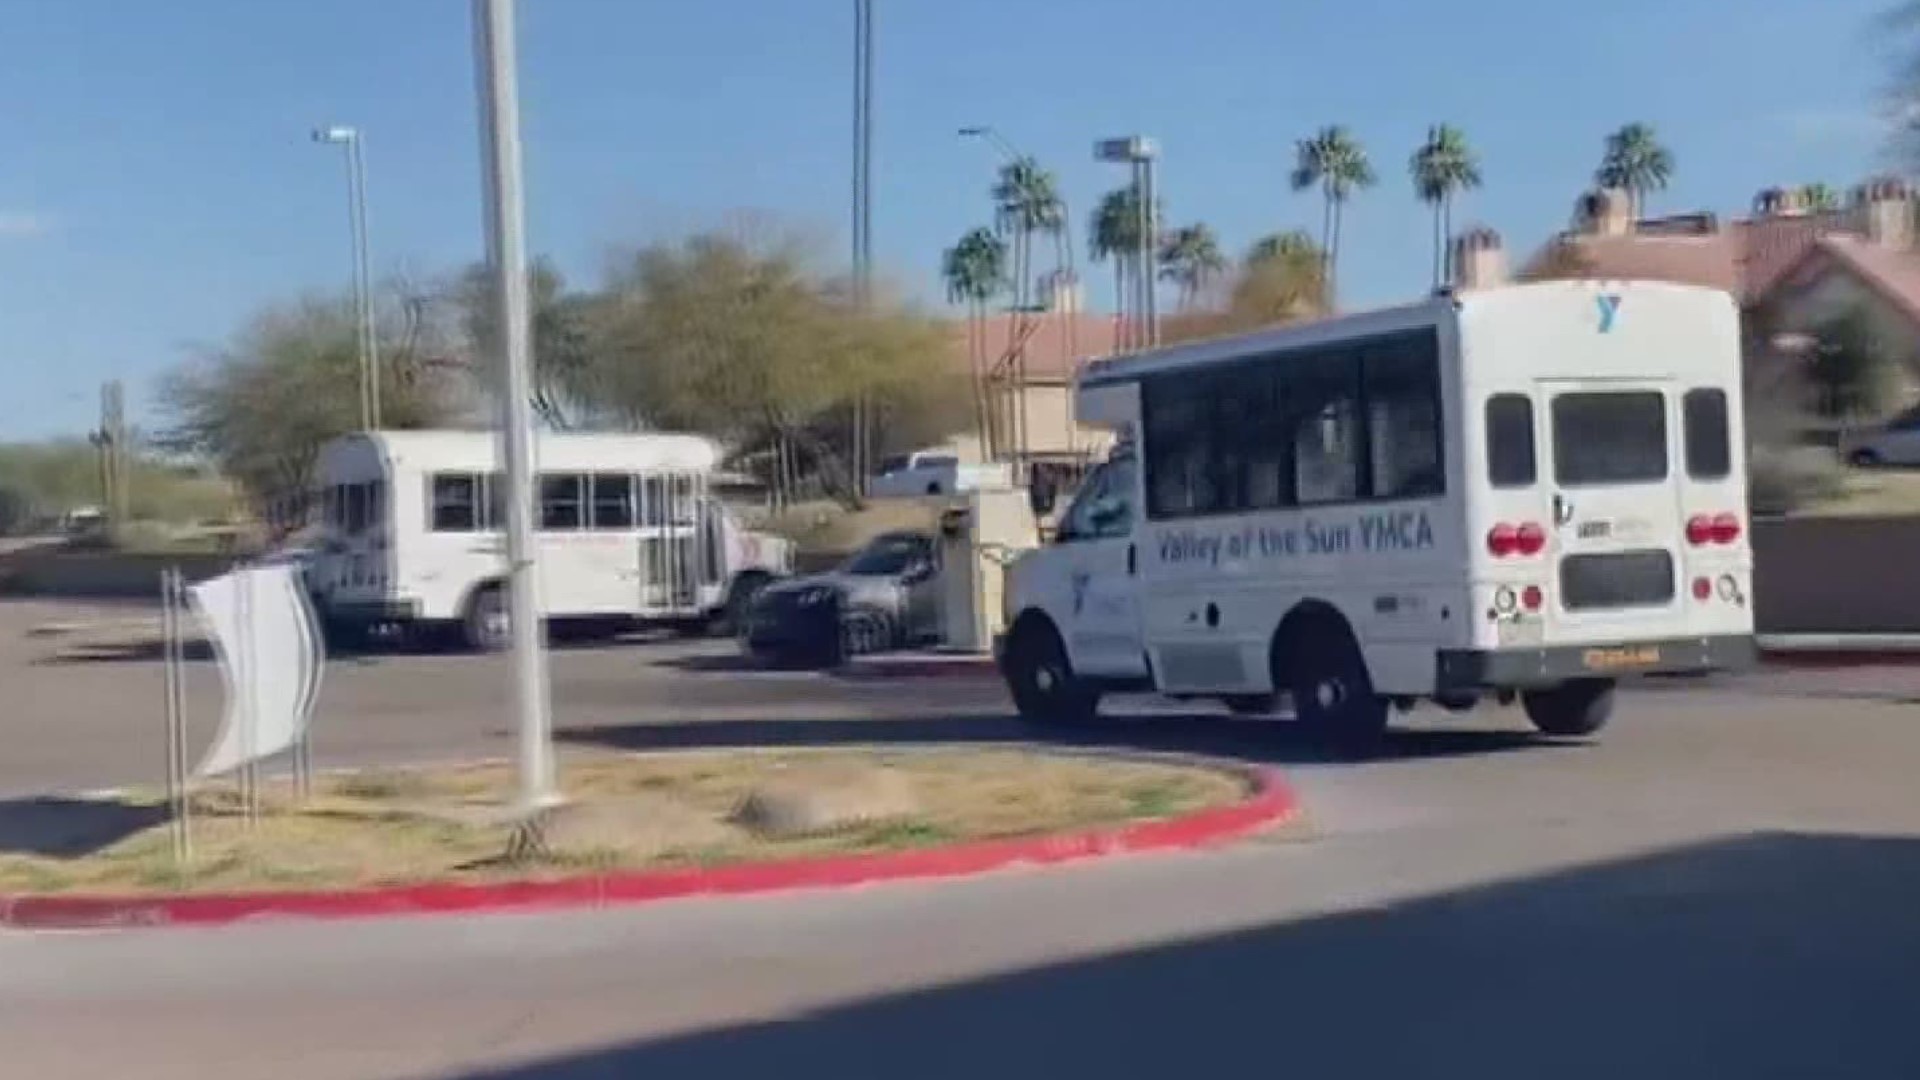 The recent theft from their organization's buses is causing cancellations for activities many Valley kids rely on, especially during the pandemic.